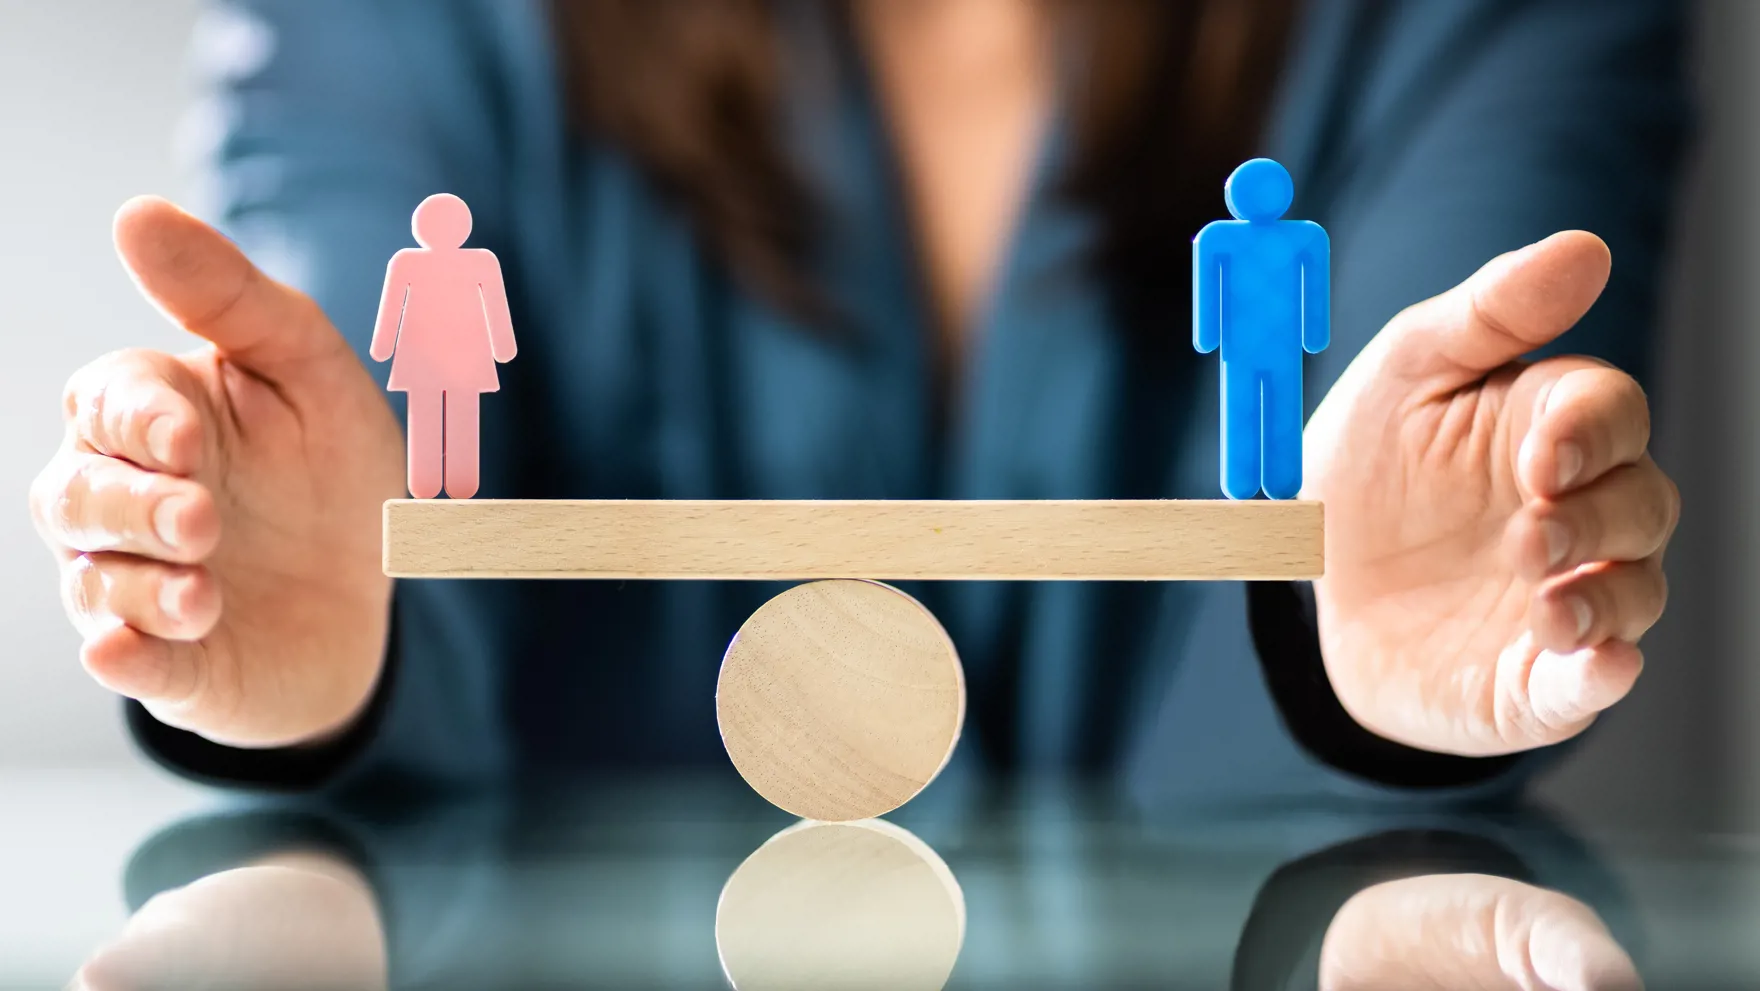 SUPPORTING GENDER BALANCE EQUITY